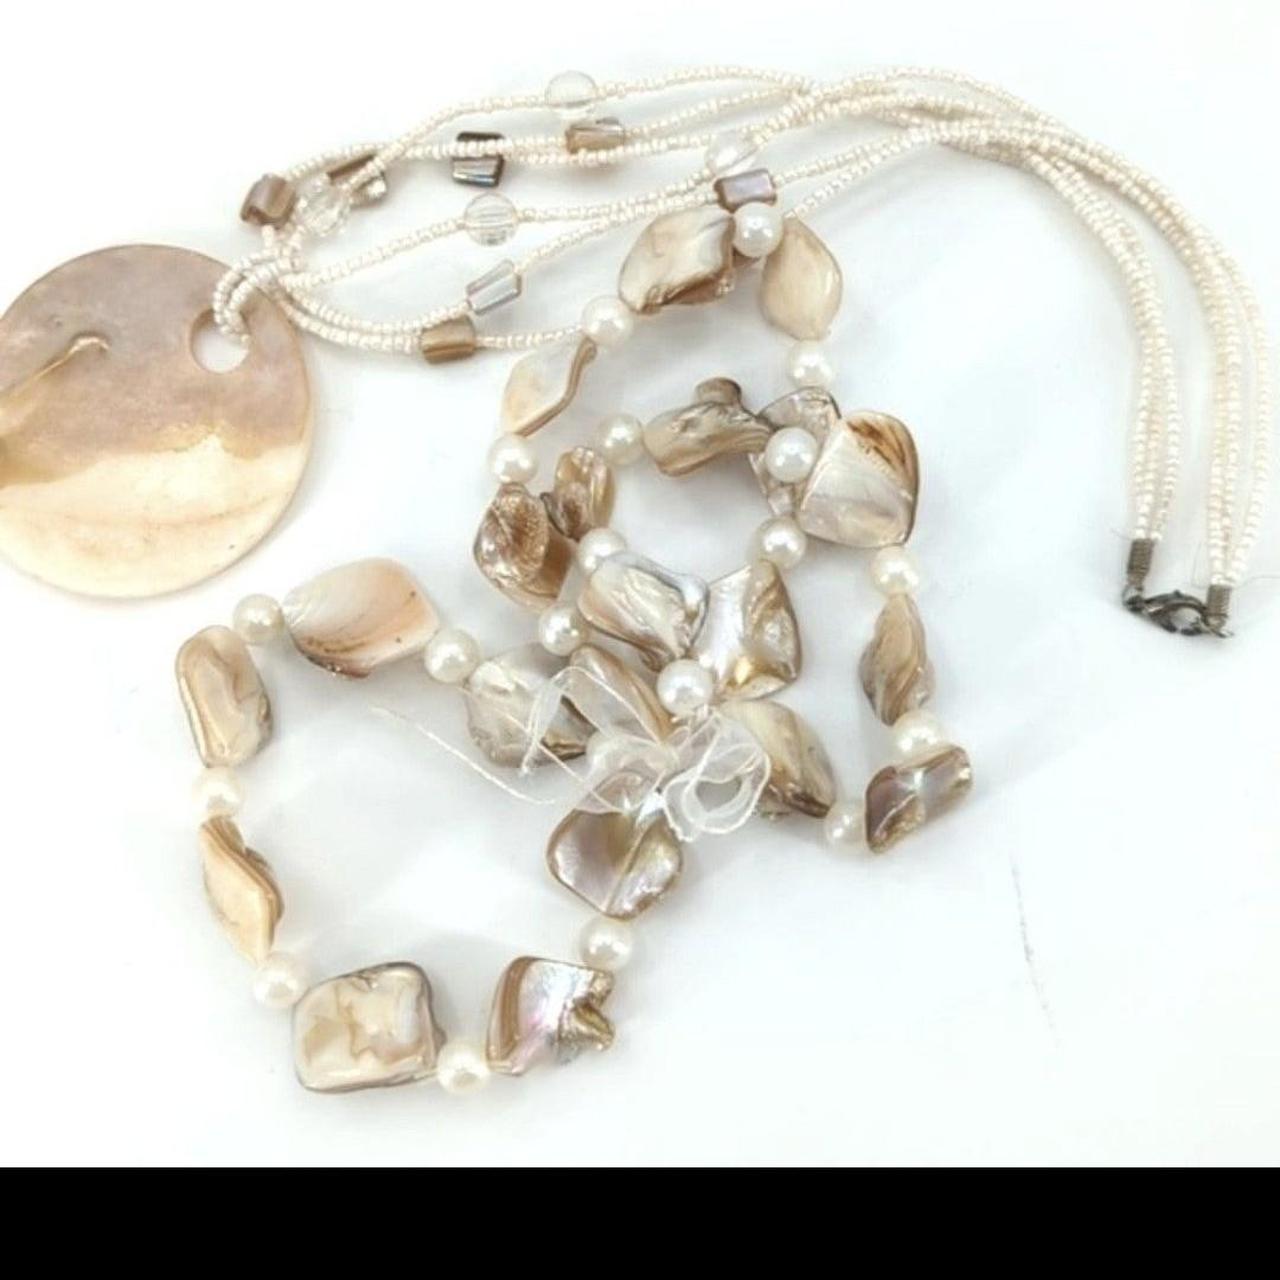 Seashell Mother of Pearl Necklace and Bracelet... - Depop